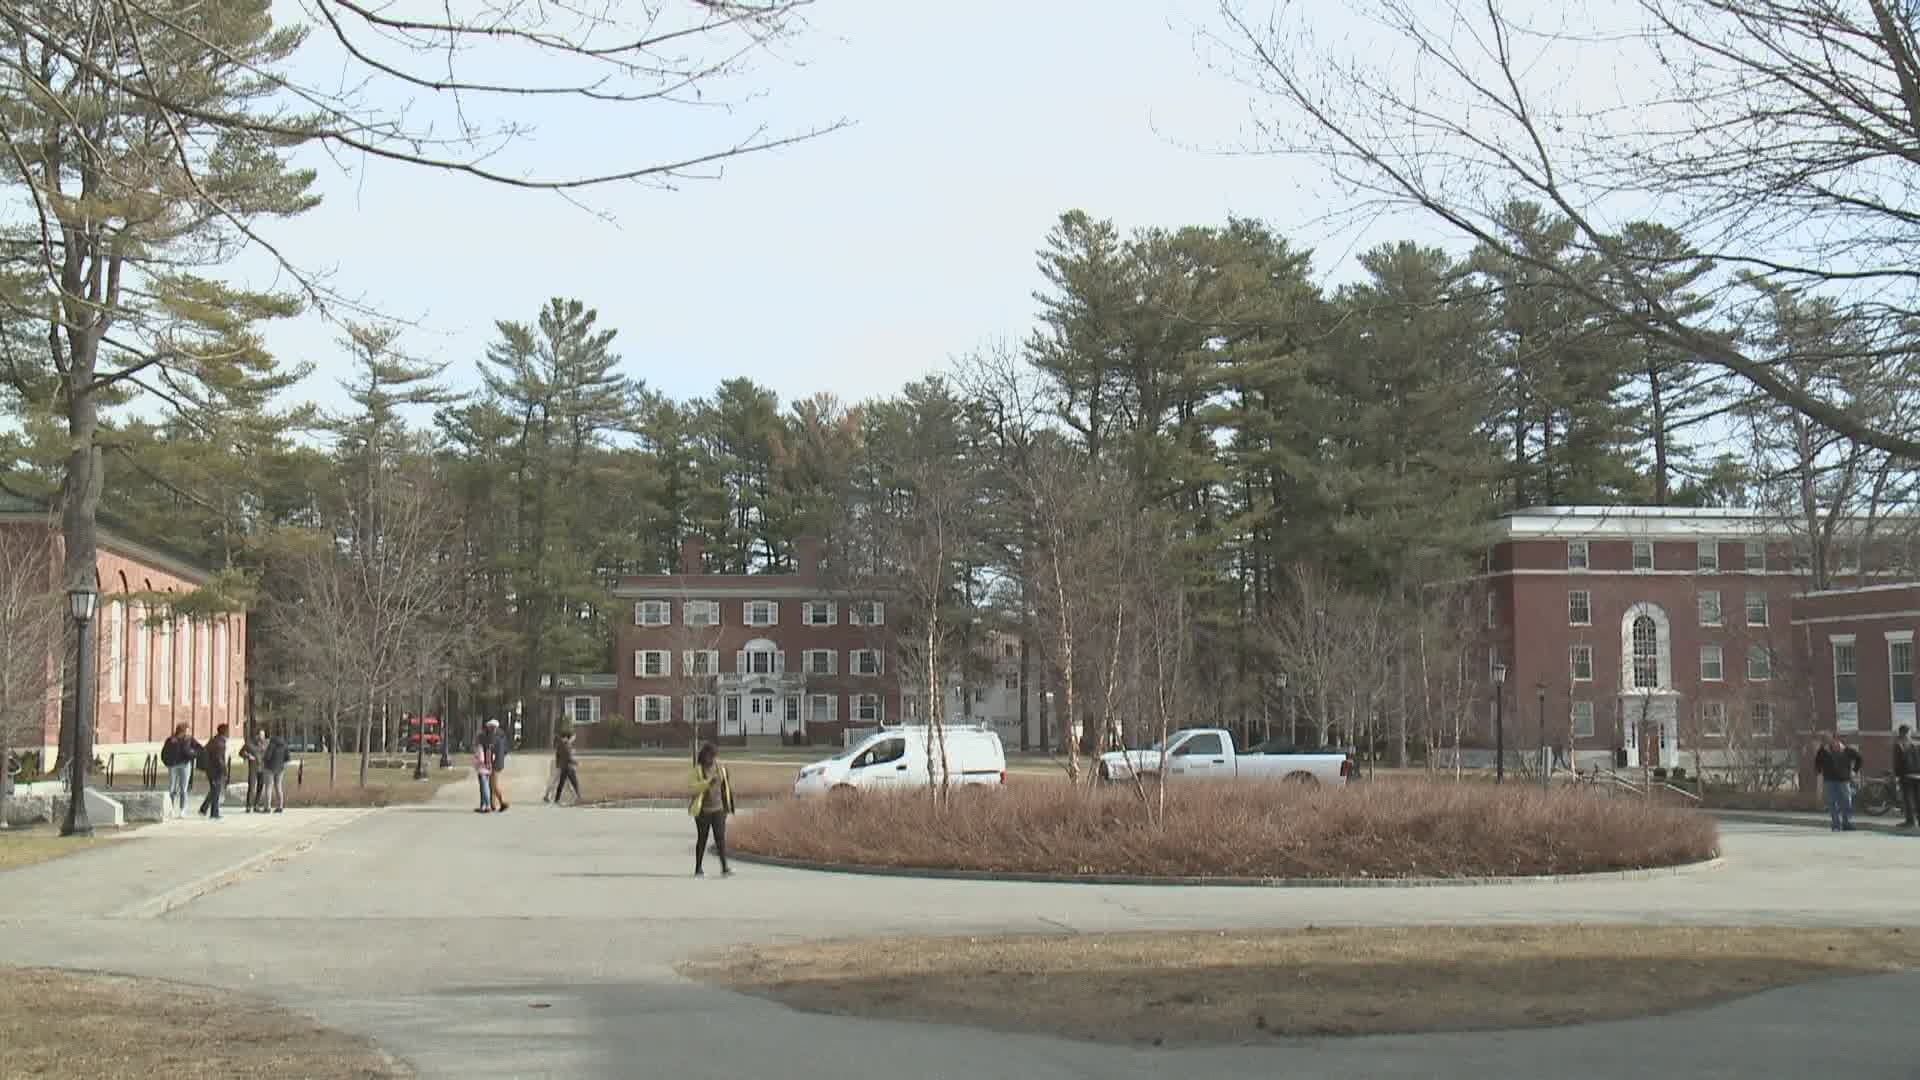 Some of Maine's colleges and universities are getting more than $5 million dollars to help low-income and first-generation college students during the pandemic.